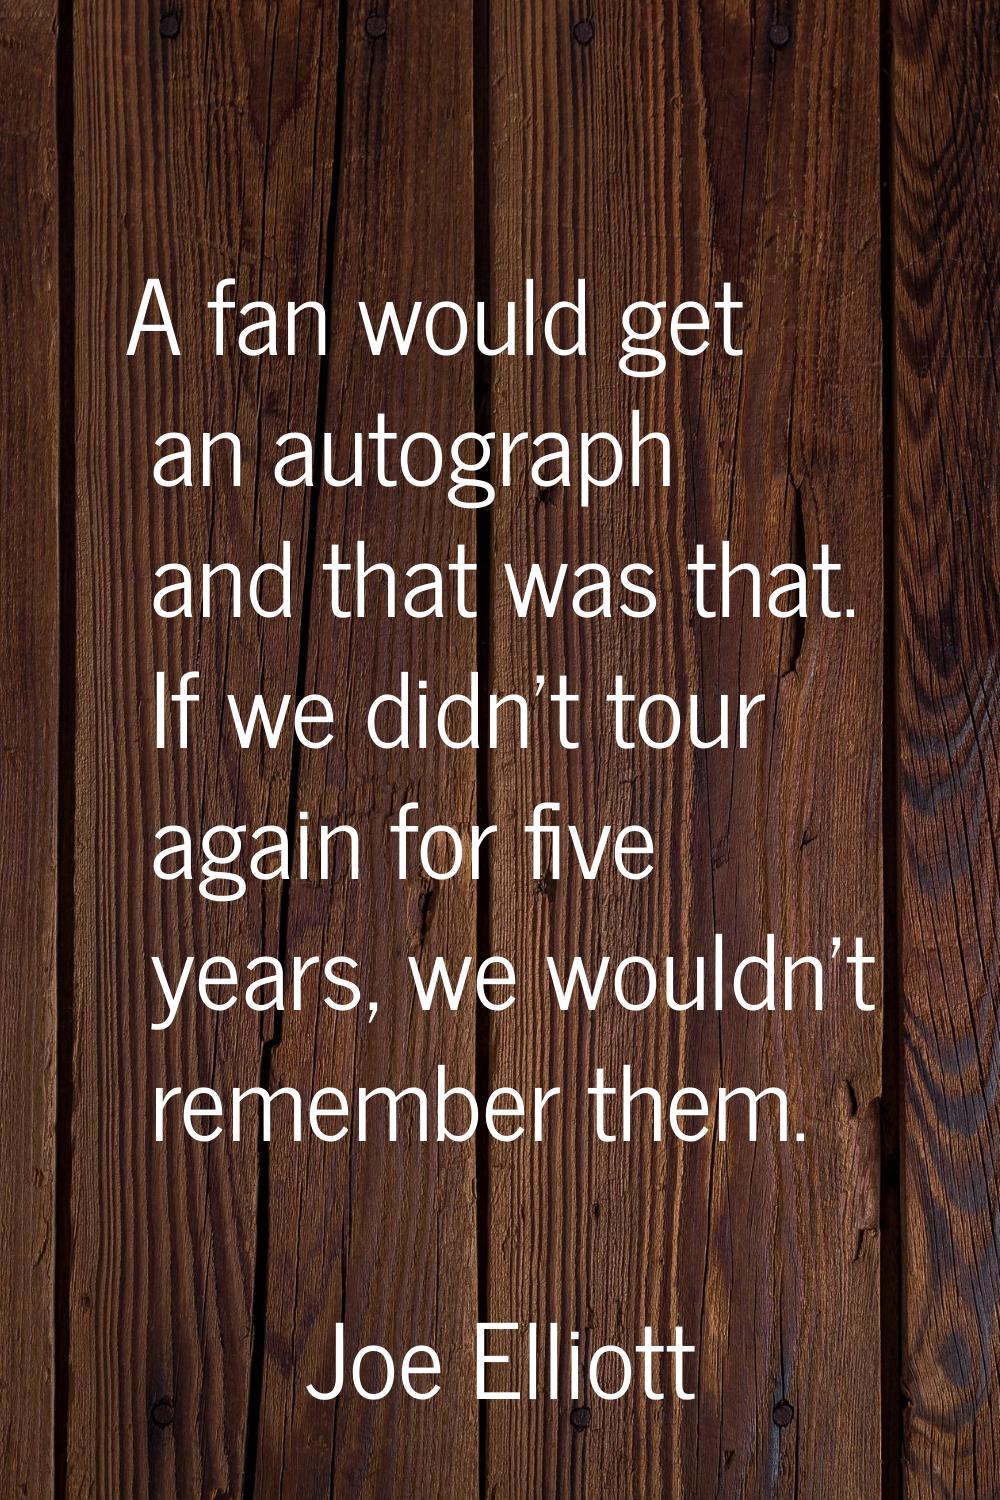 A fan would get an autograph and that was that. If we didn't tour again for five years, we wouldn't